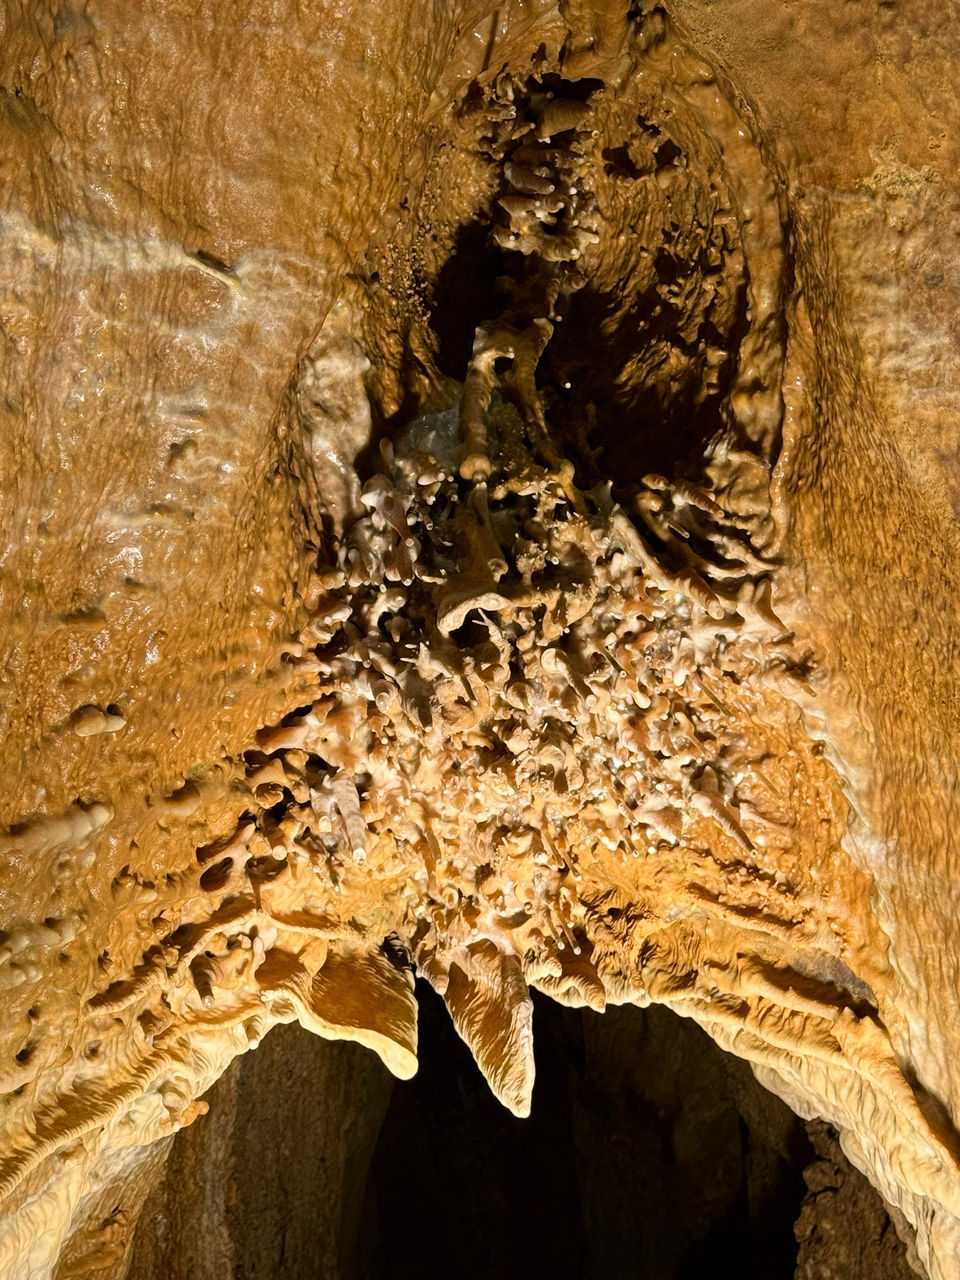 cave, nature, geology, no people, formation, rock, textured, close-up, outdoors, caving, day, pattern, beauty in nature, stalagmite, rock formation